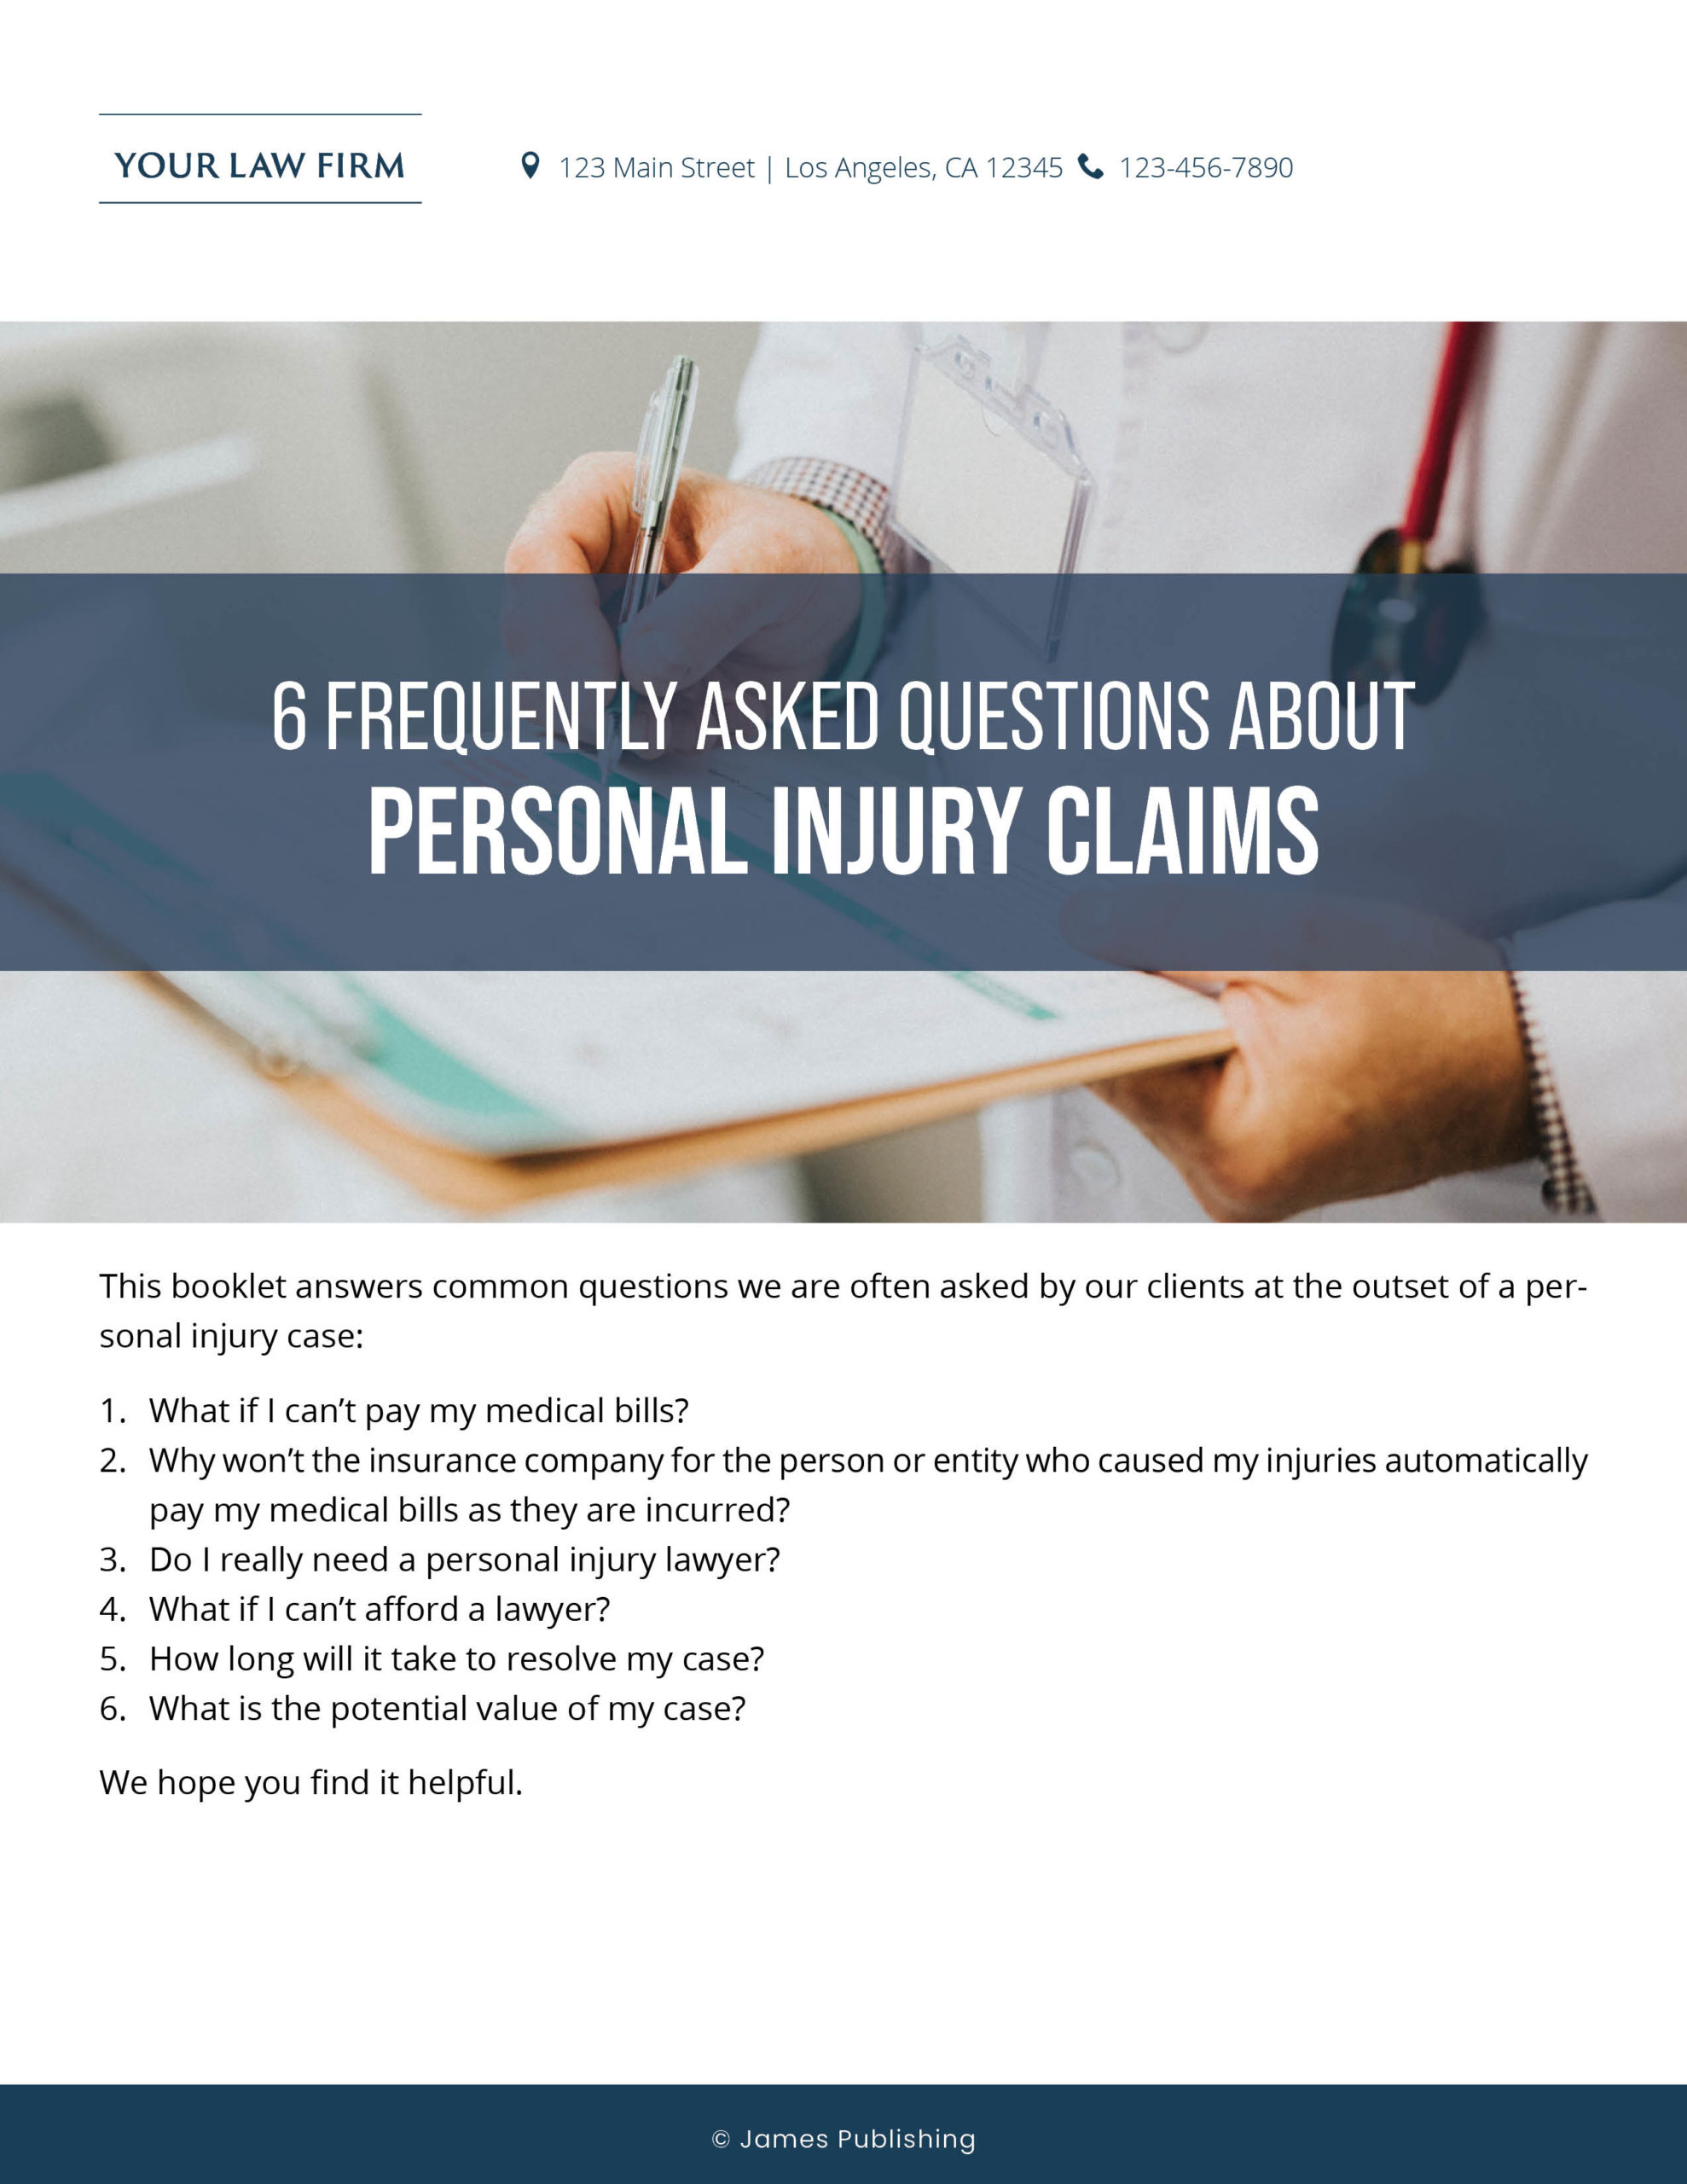 PI-30 6 Frequently Asked Questions About Personal Injury Claims